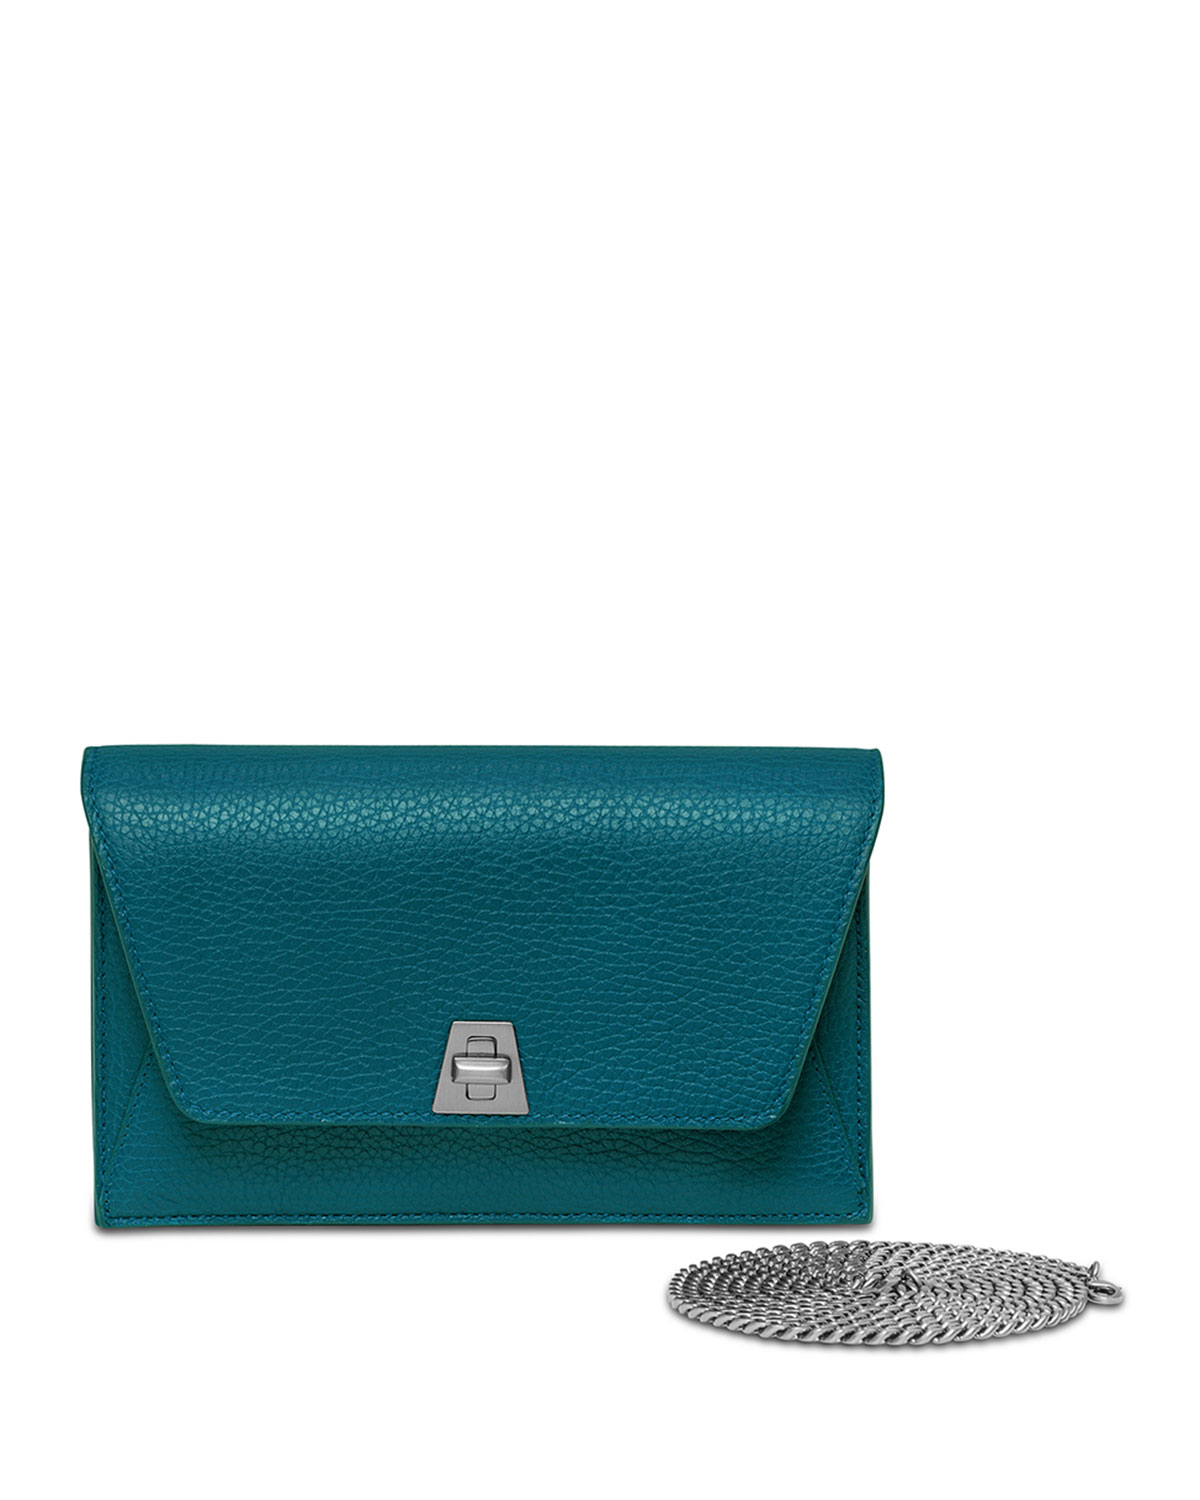 Lyst - Akris Anouk Leather Clutch Bag in Blue